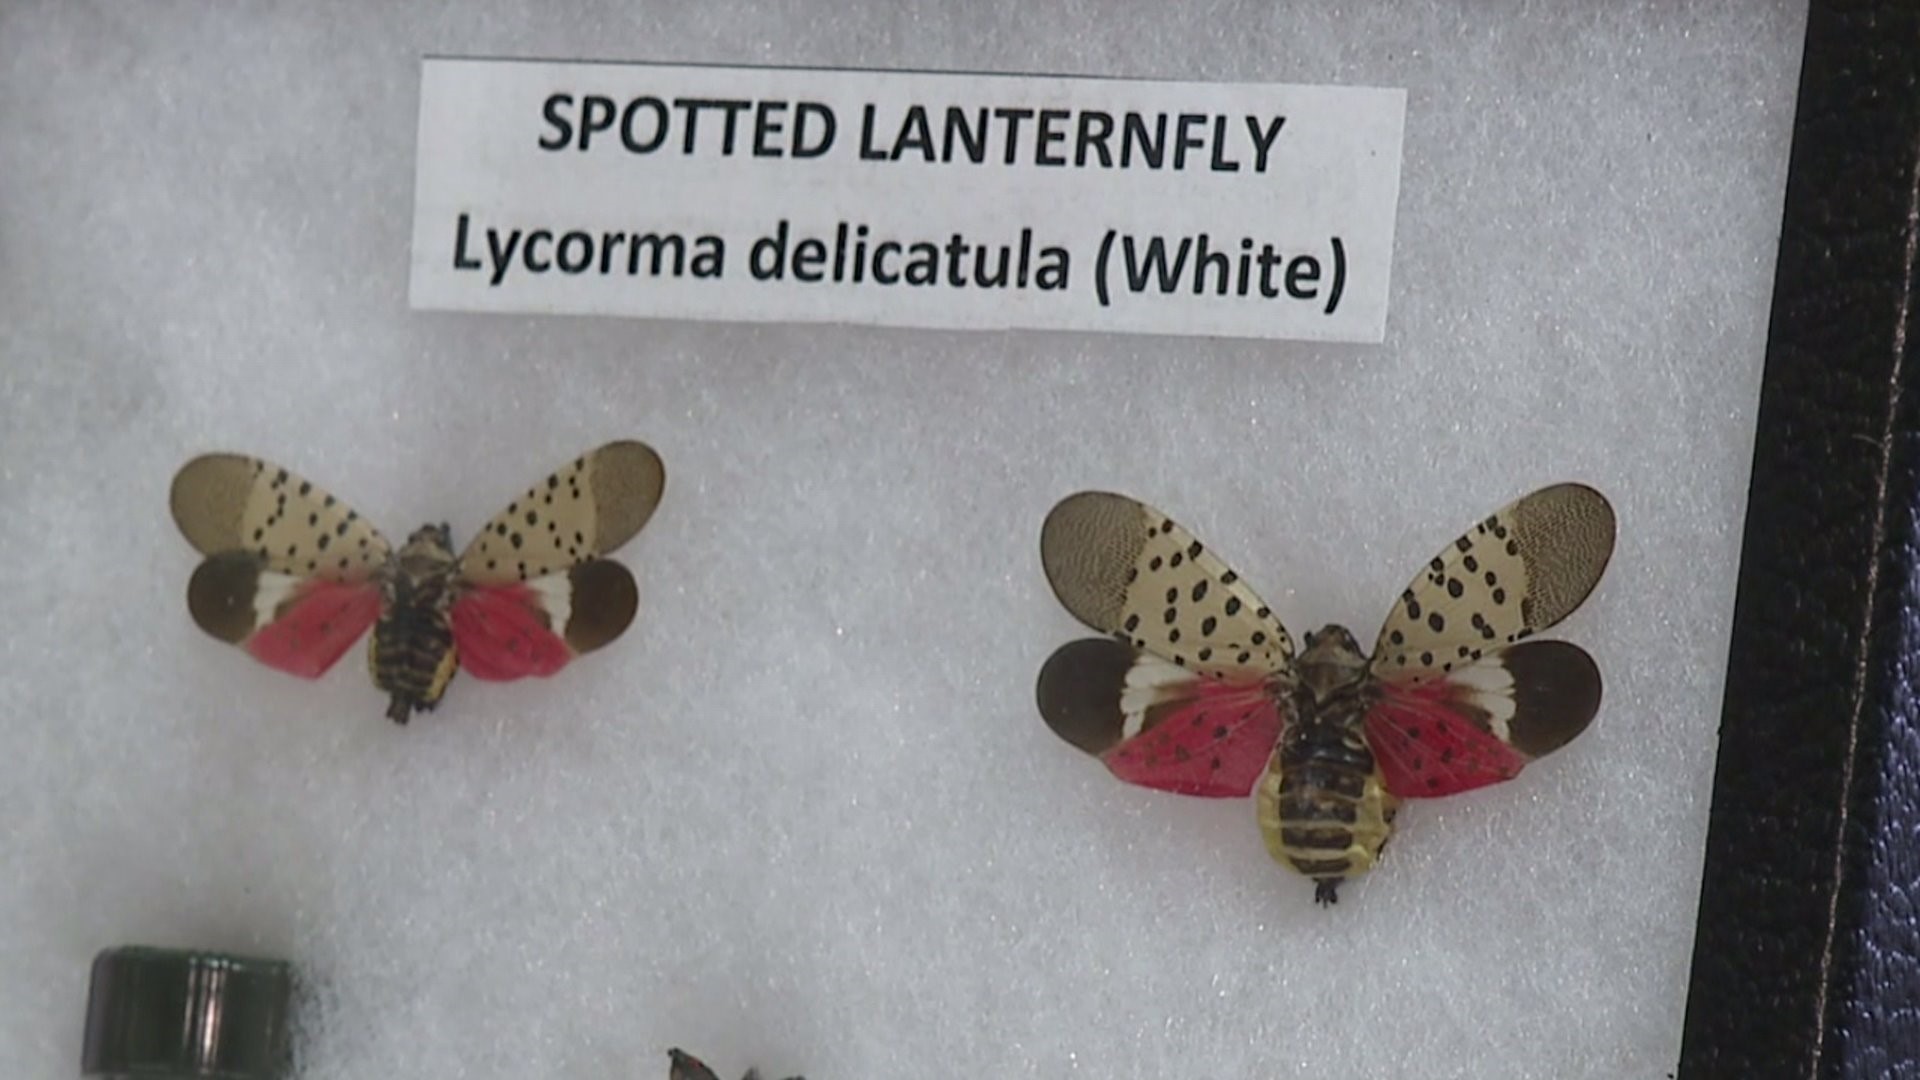 Grant Given to PA to Fight Spotted Lanternfly